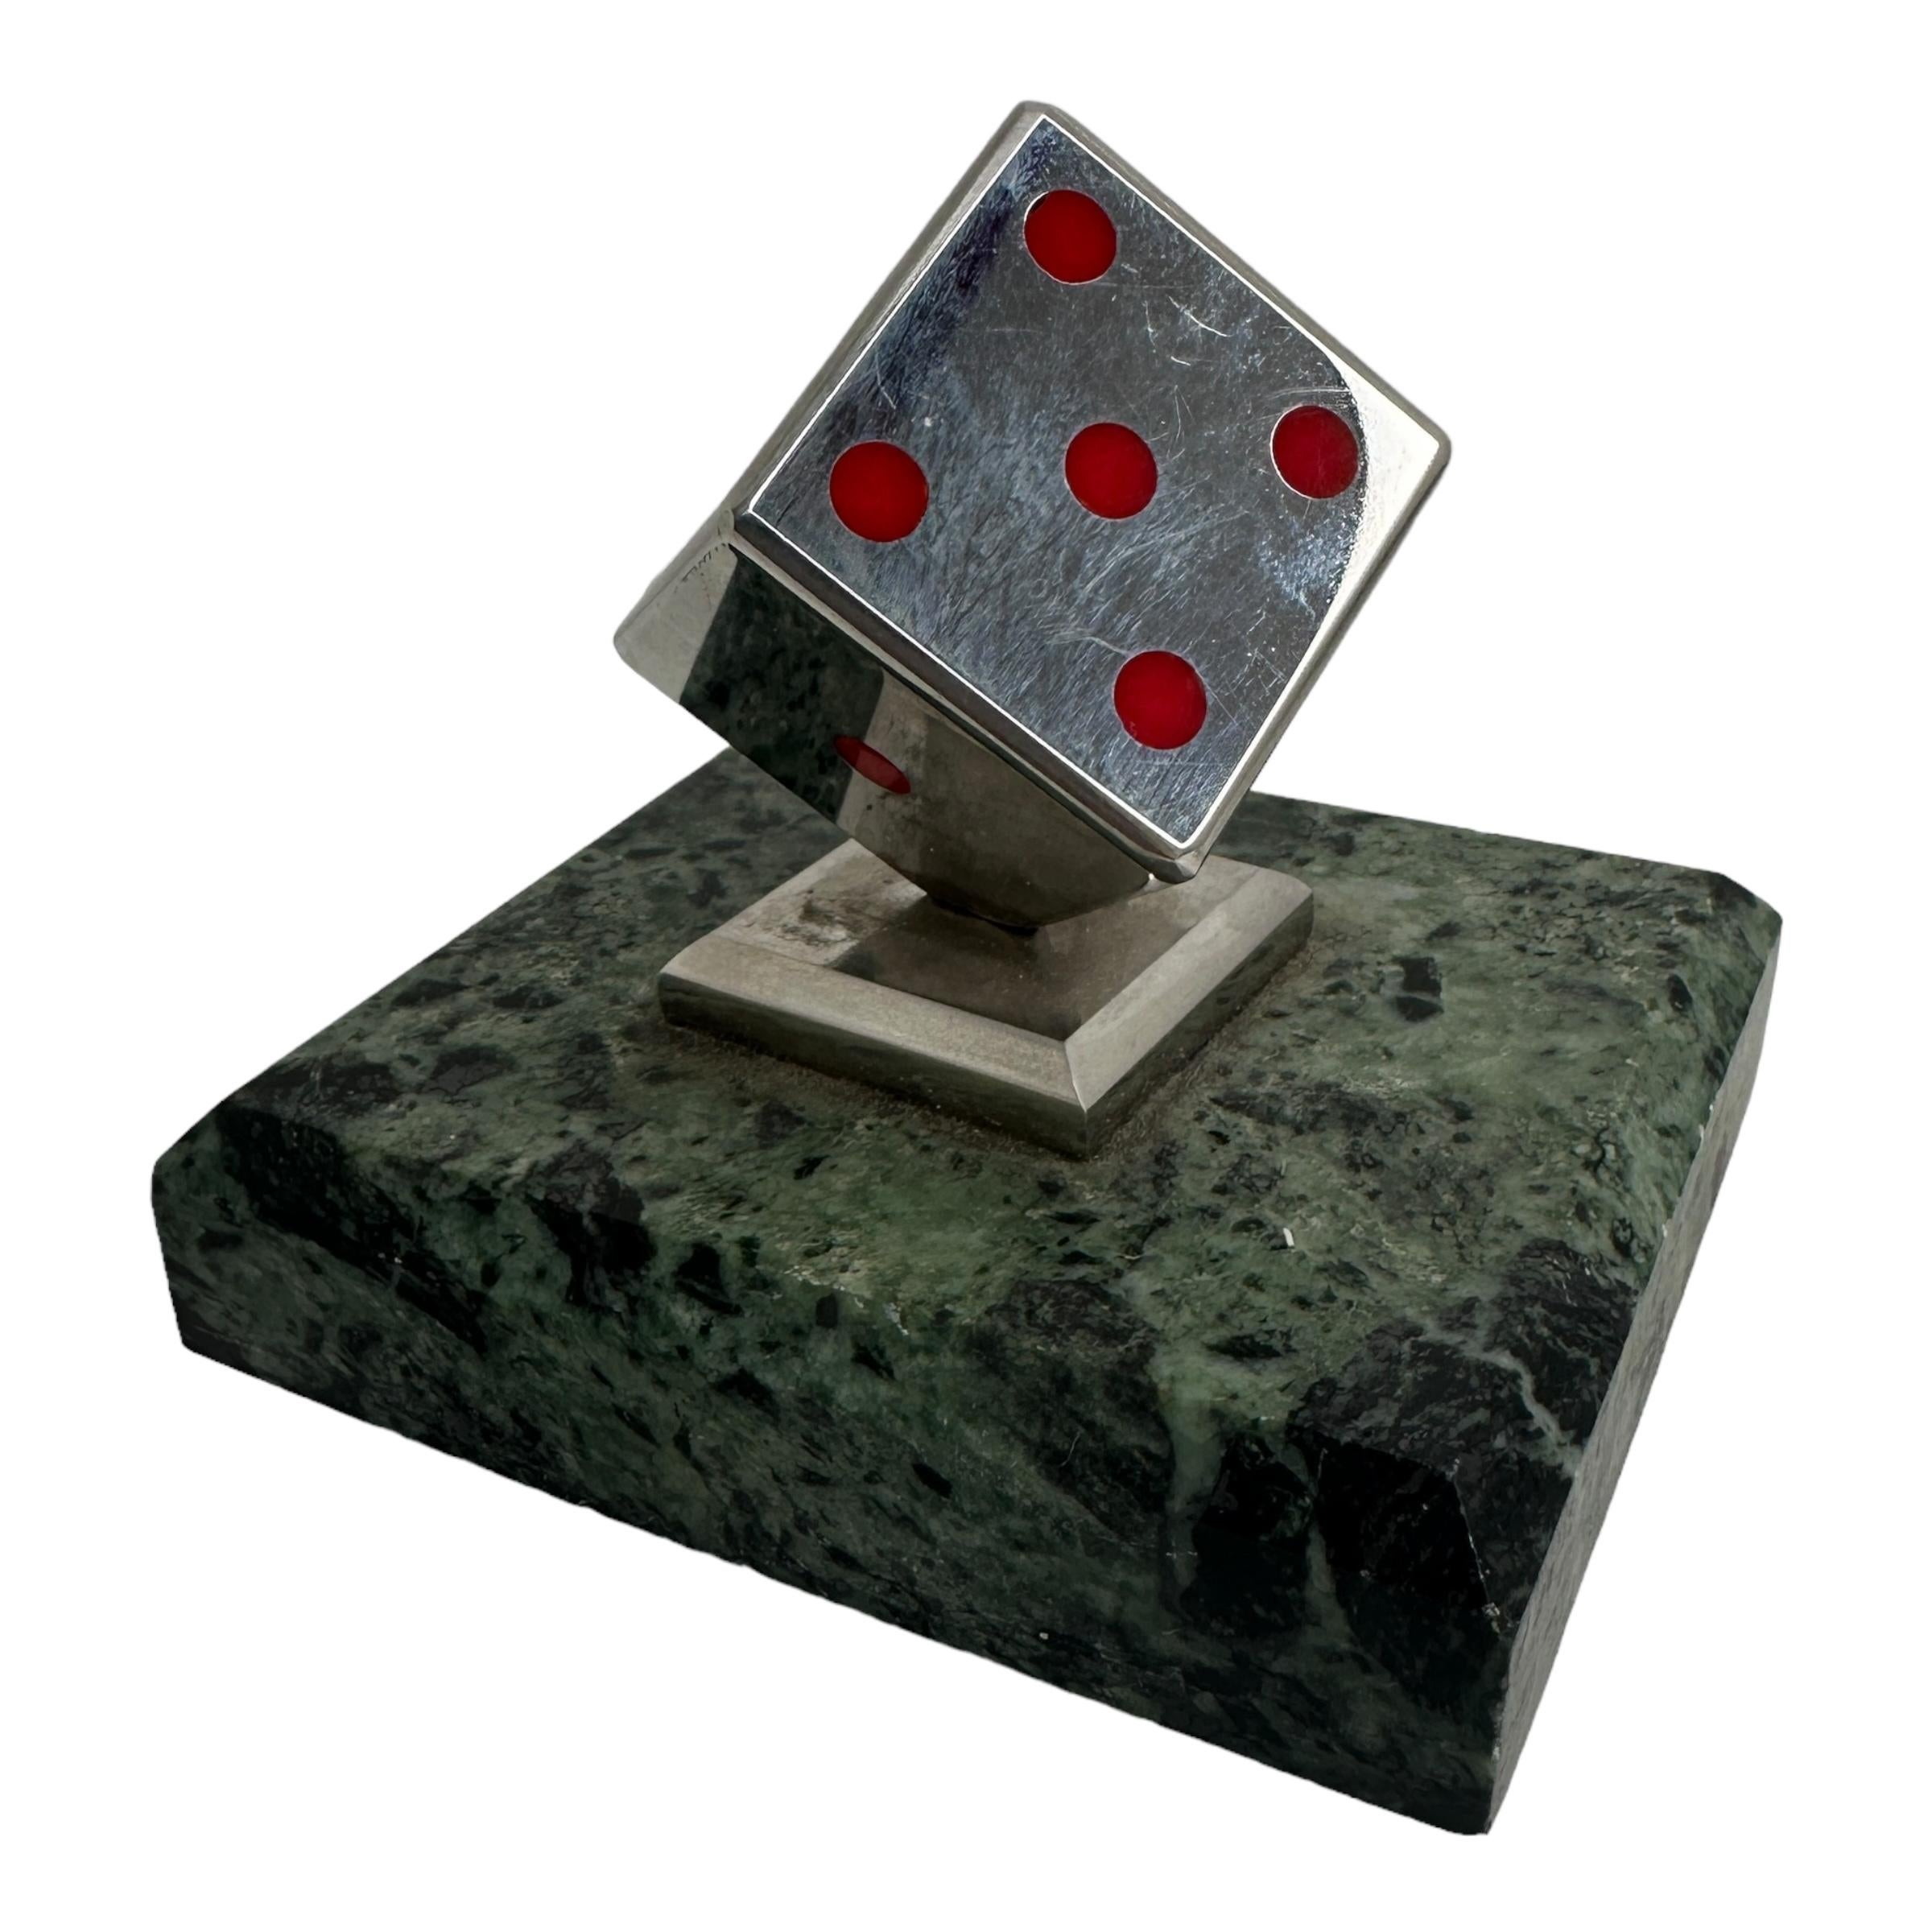 Dice Metal Statue on Marble Base Paper Weight Mid-Century Modern, German, 1970s For Sale 6